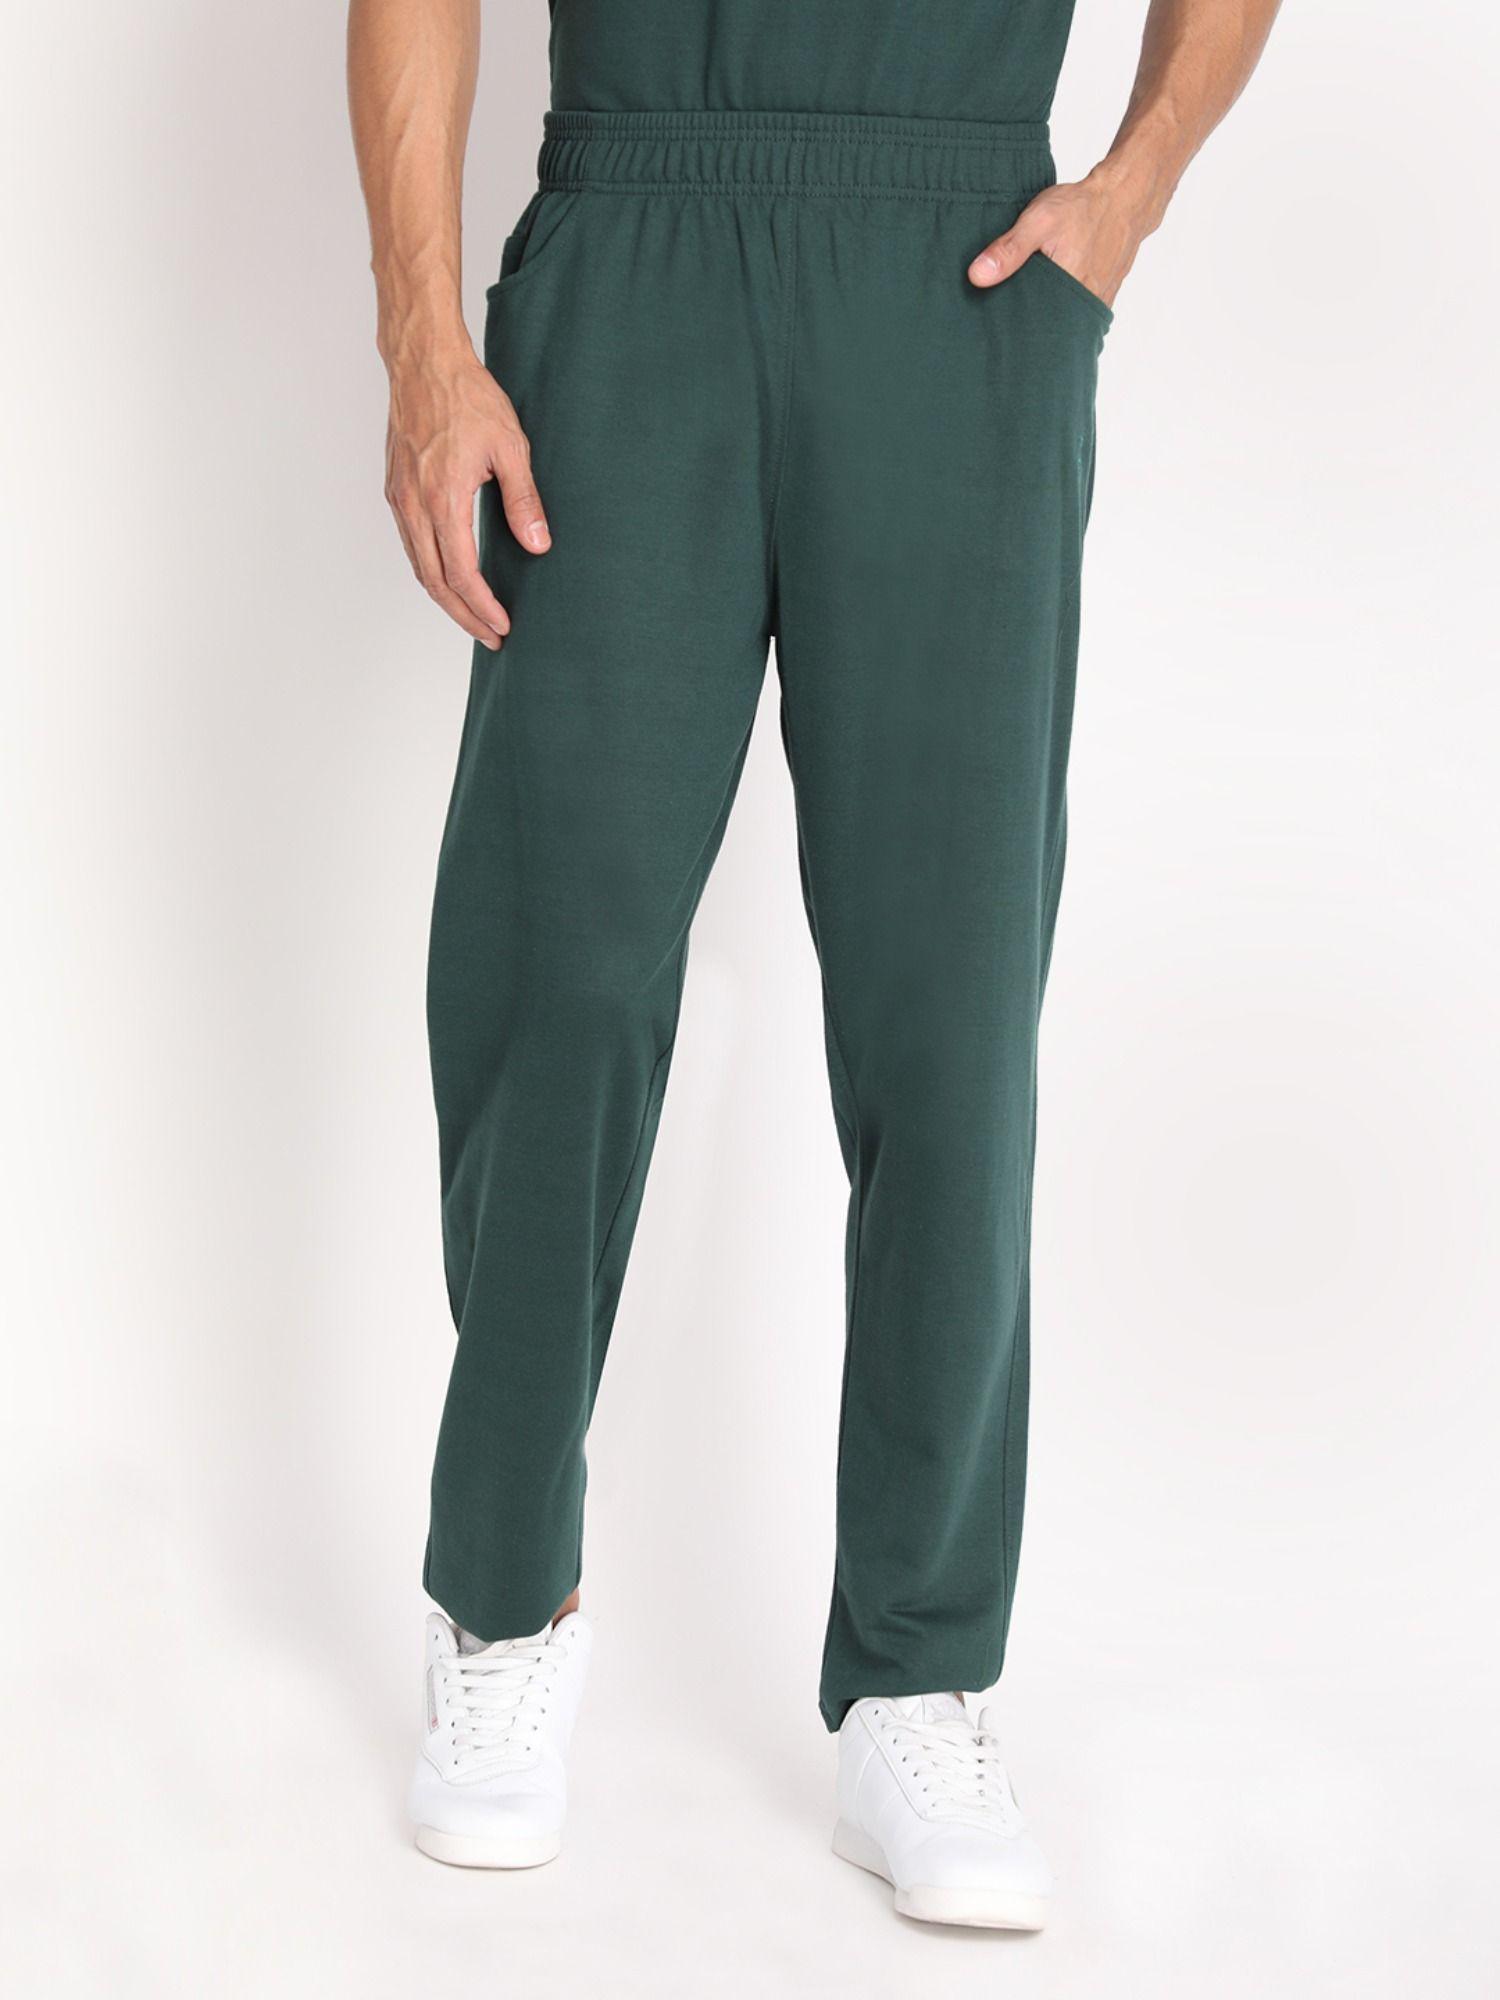 mens-cotton-comfort-fit-green-lower